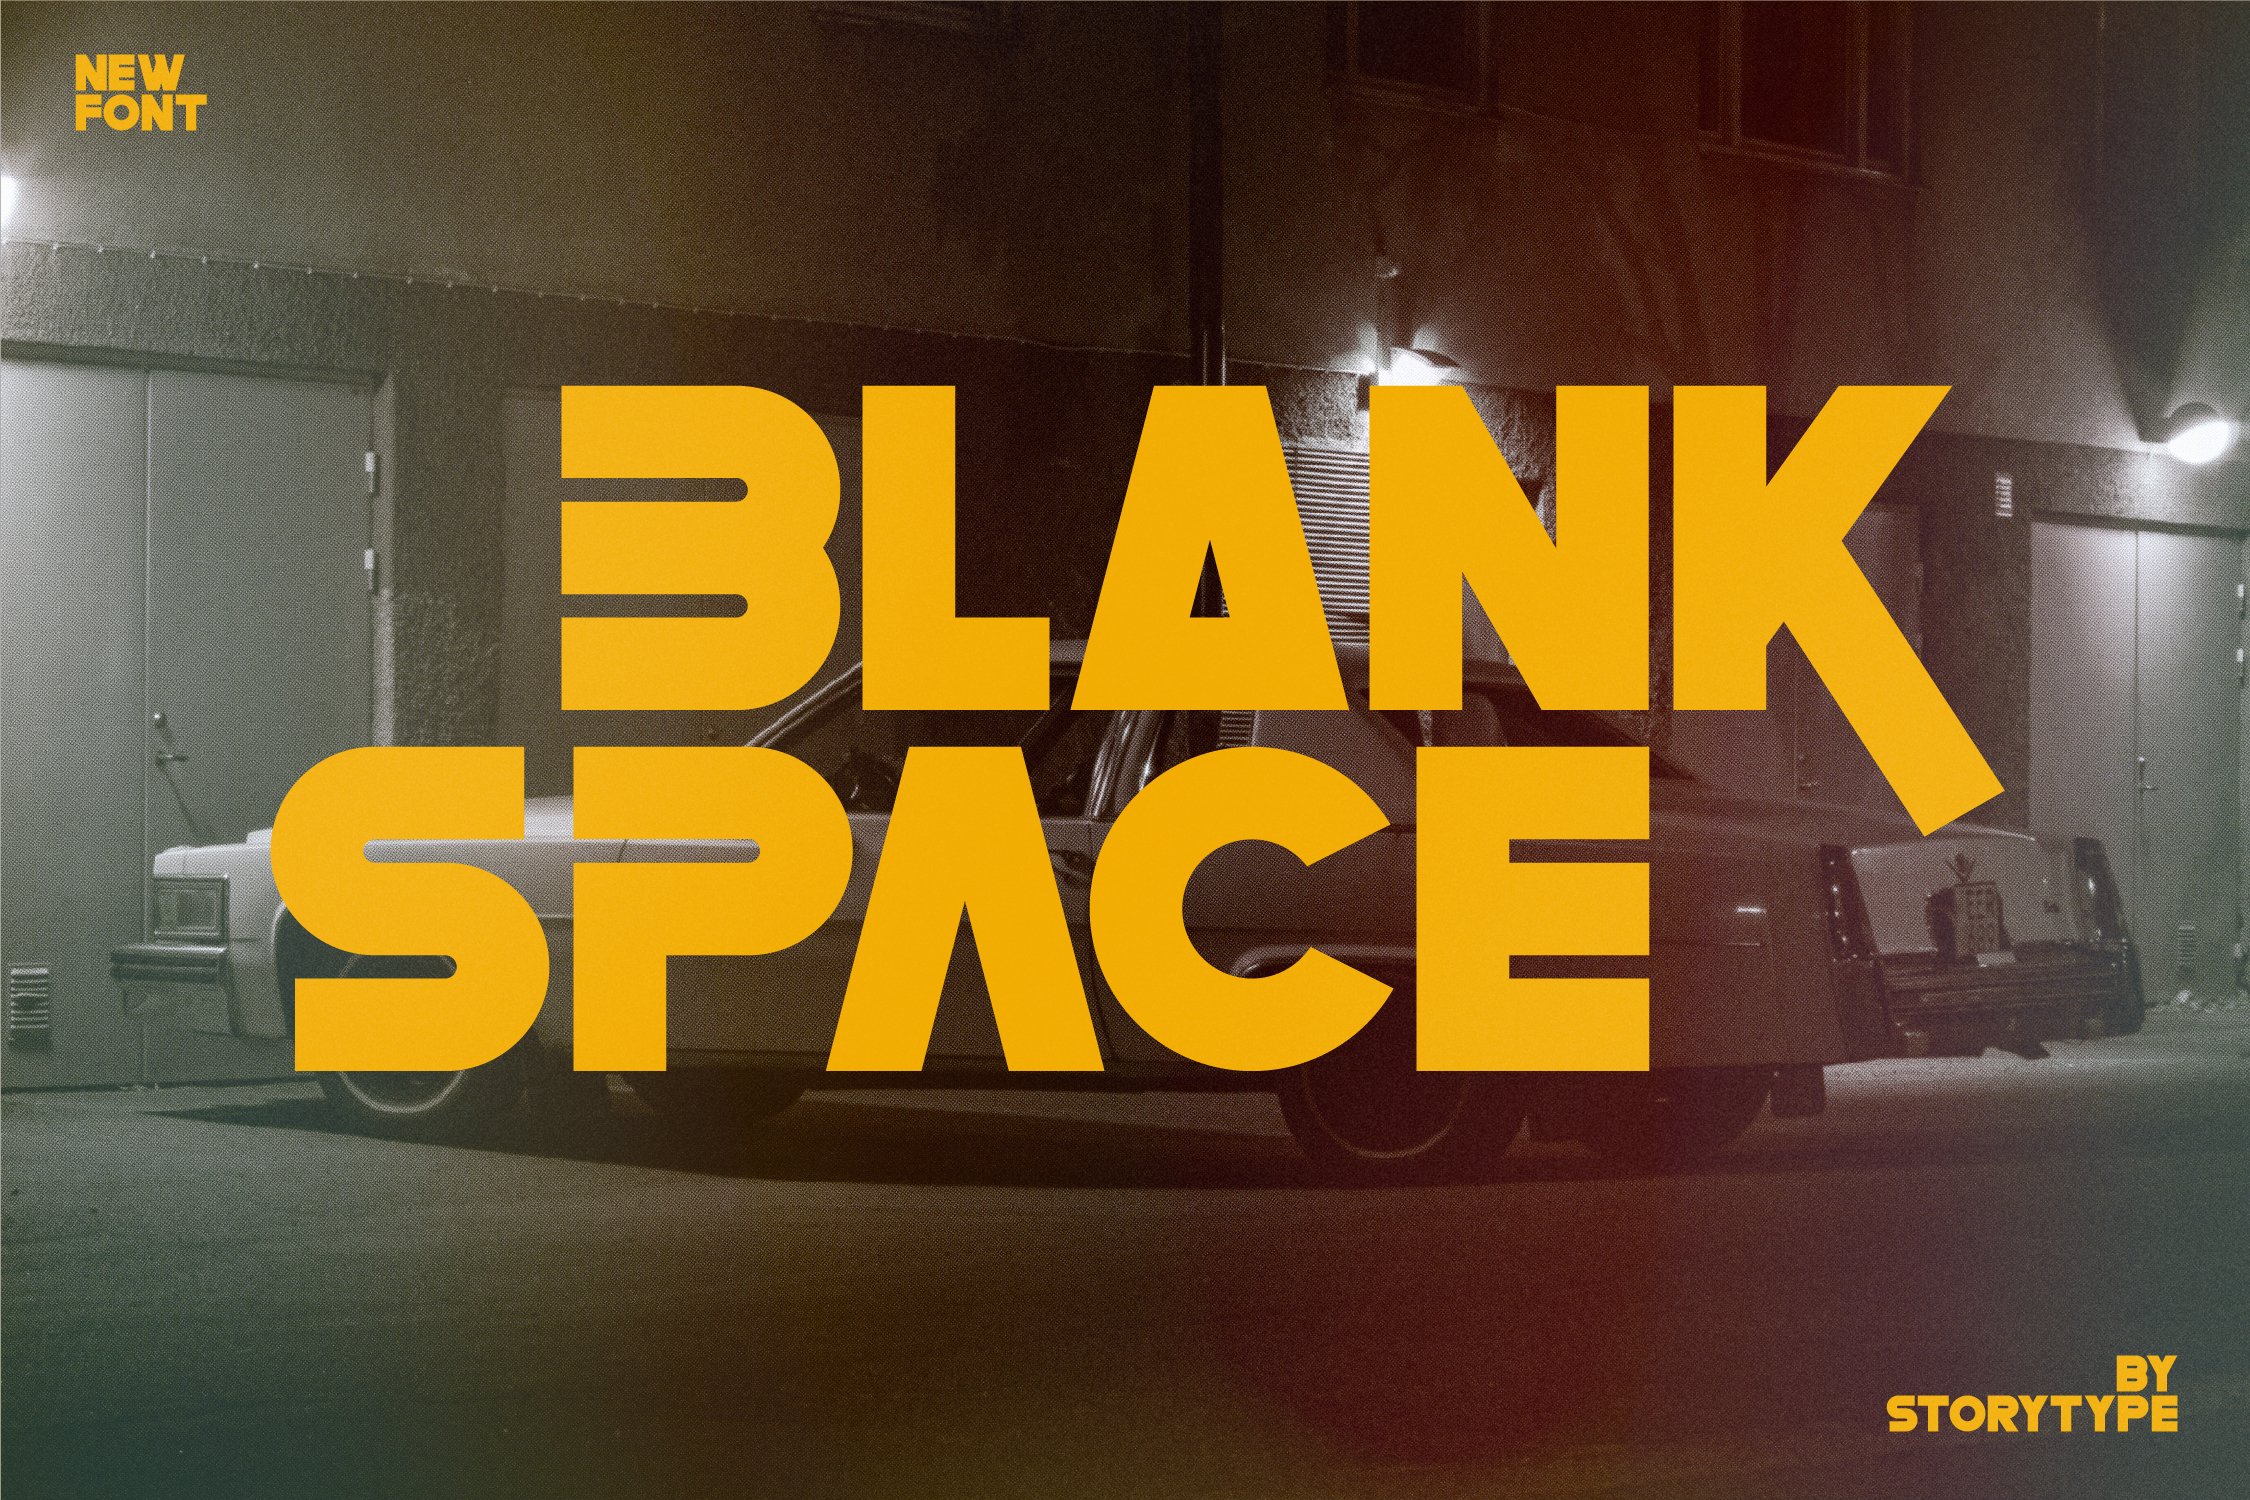 Blank Space Type Face Font cover image.